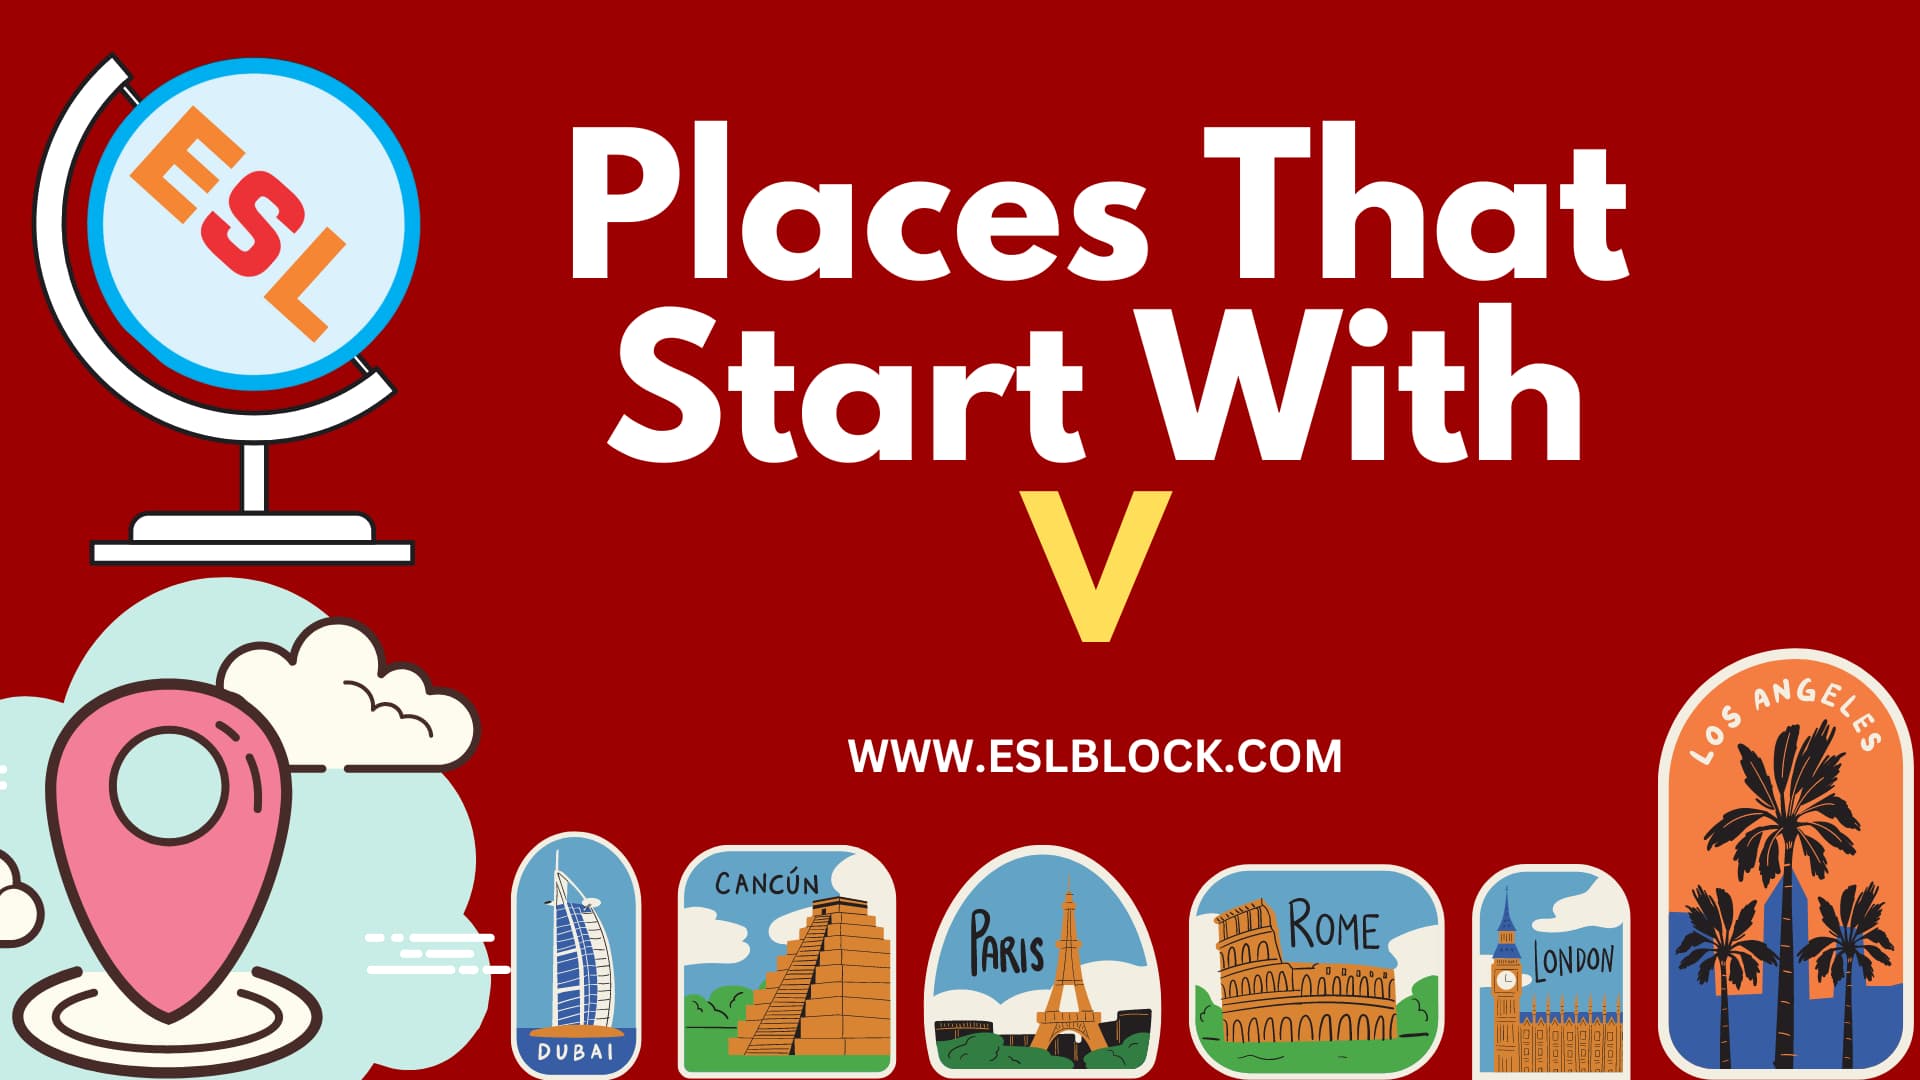 4 Letter Places, 5 Letter Places Starting With V, English, English Grammar, English Vocabulary, English Words, List of Places That Start With V, Places List, Places Names, Places That Start With V, V Places, V Places in English, V Places Names, Vocabulary, Words That Start With V